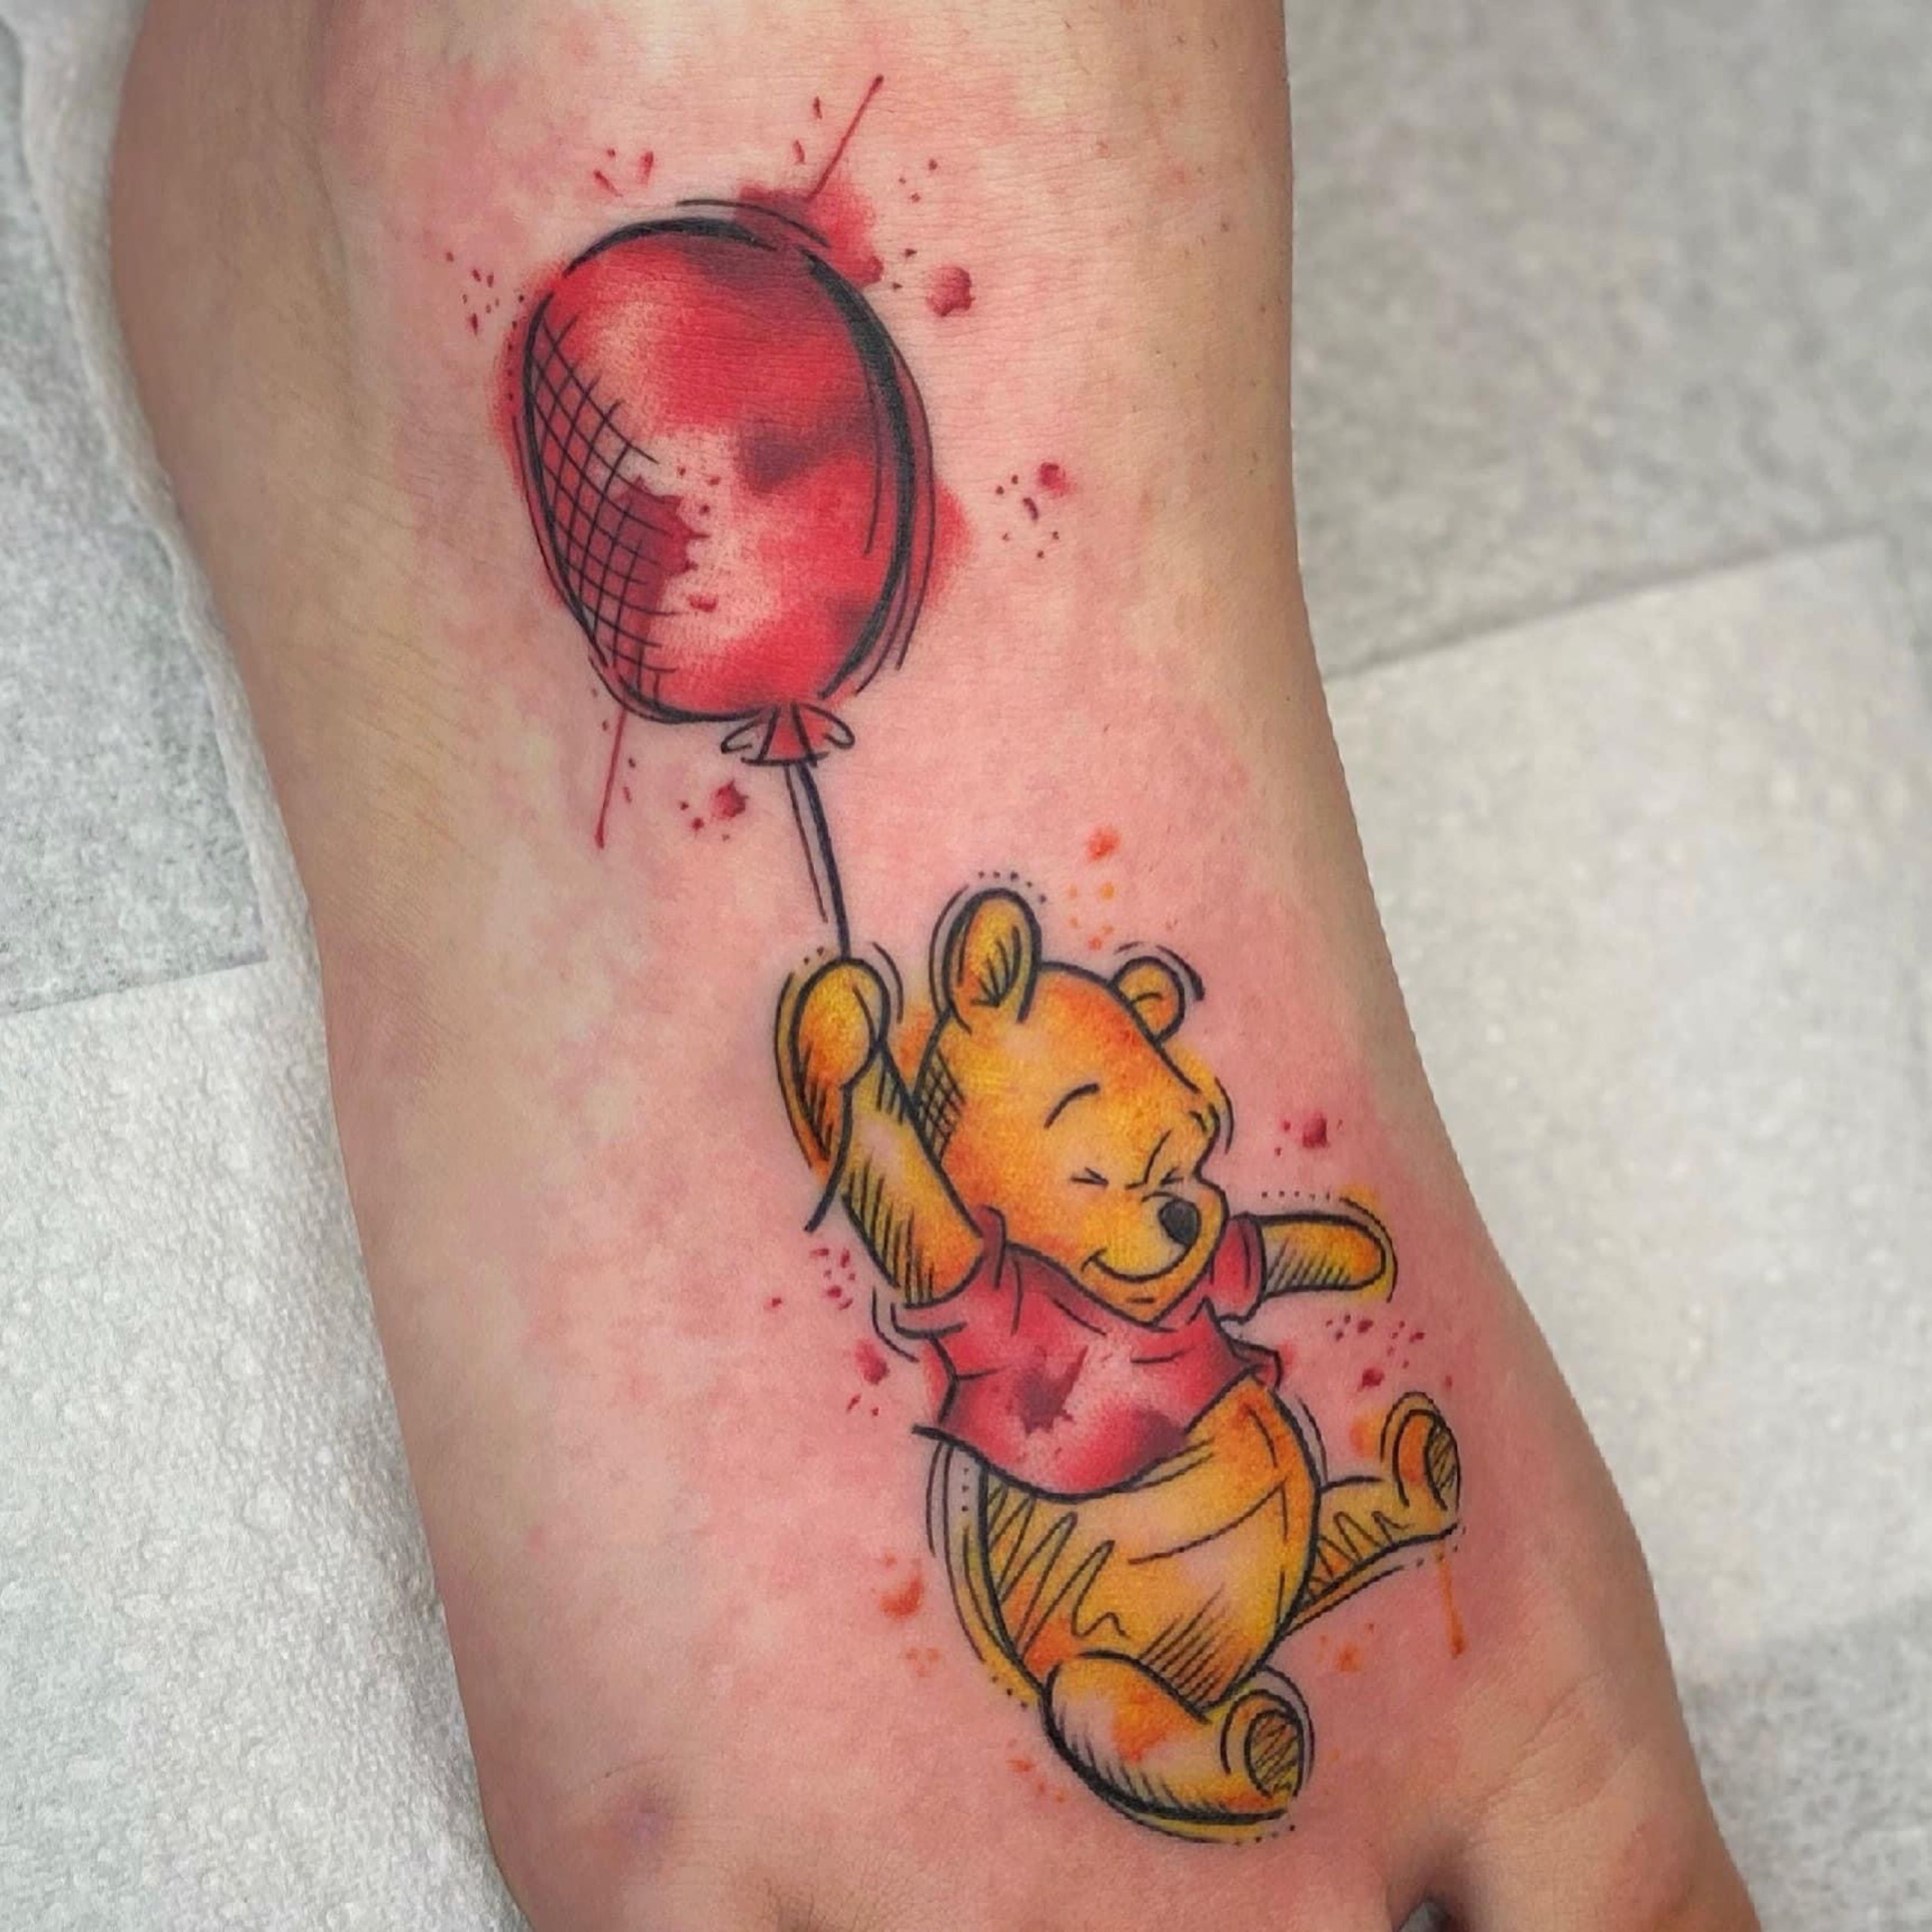 Buy TEMPORARY TATTOO Set of 4 Winnie the Pooh Set of 4 Panda  Online in  India  Etsy